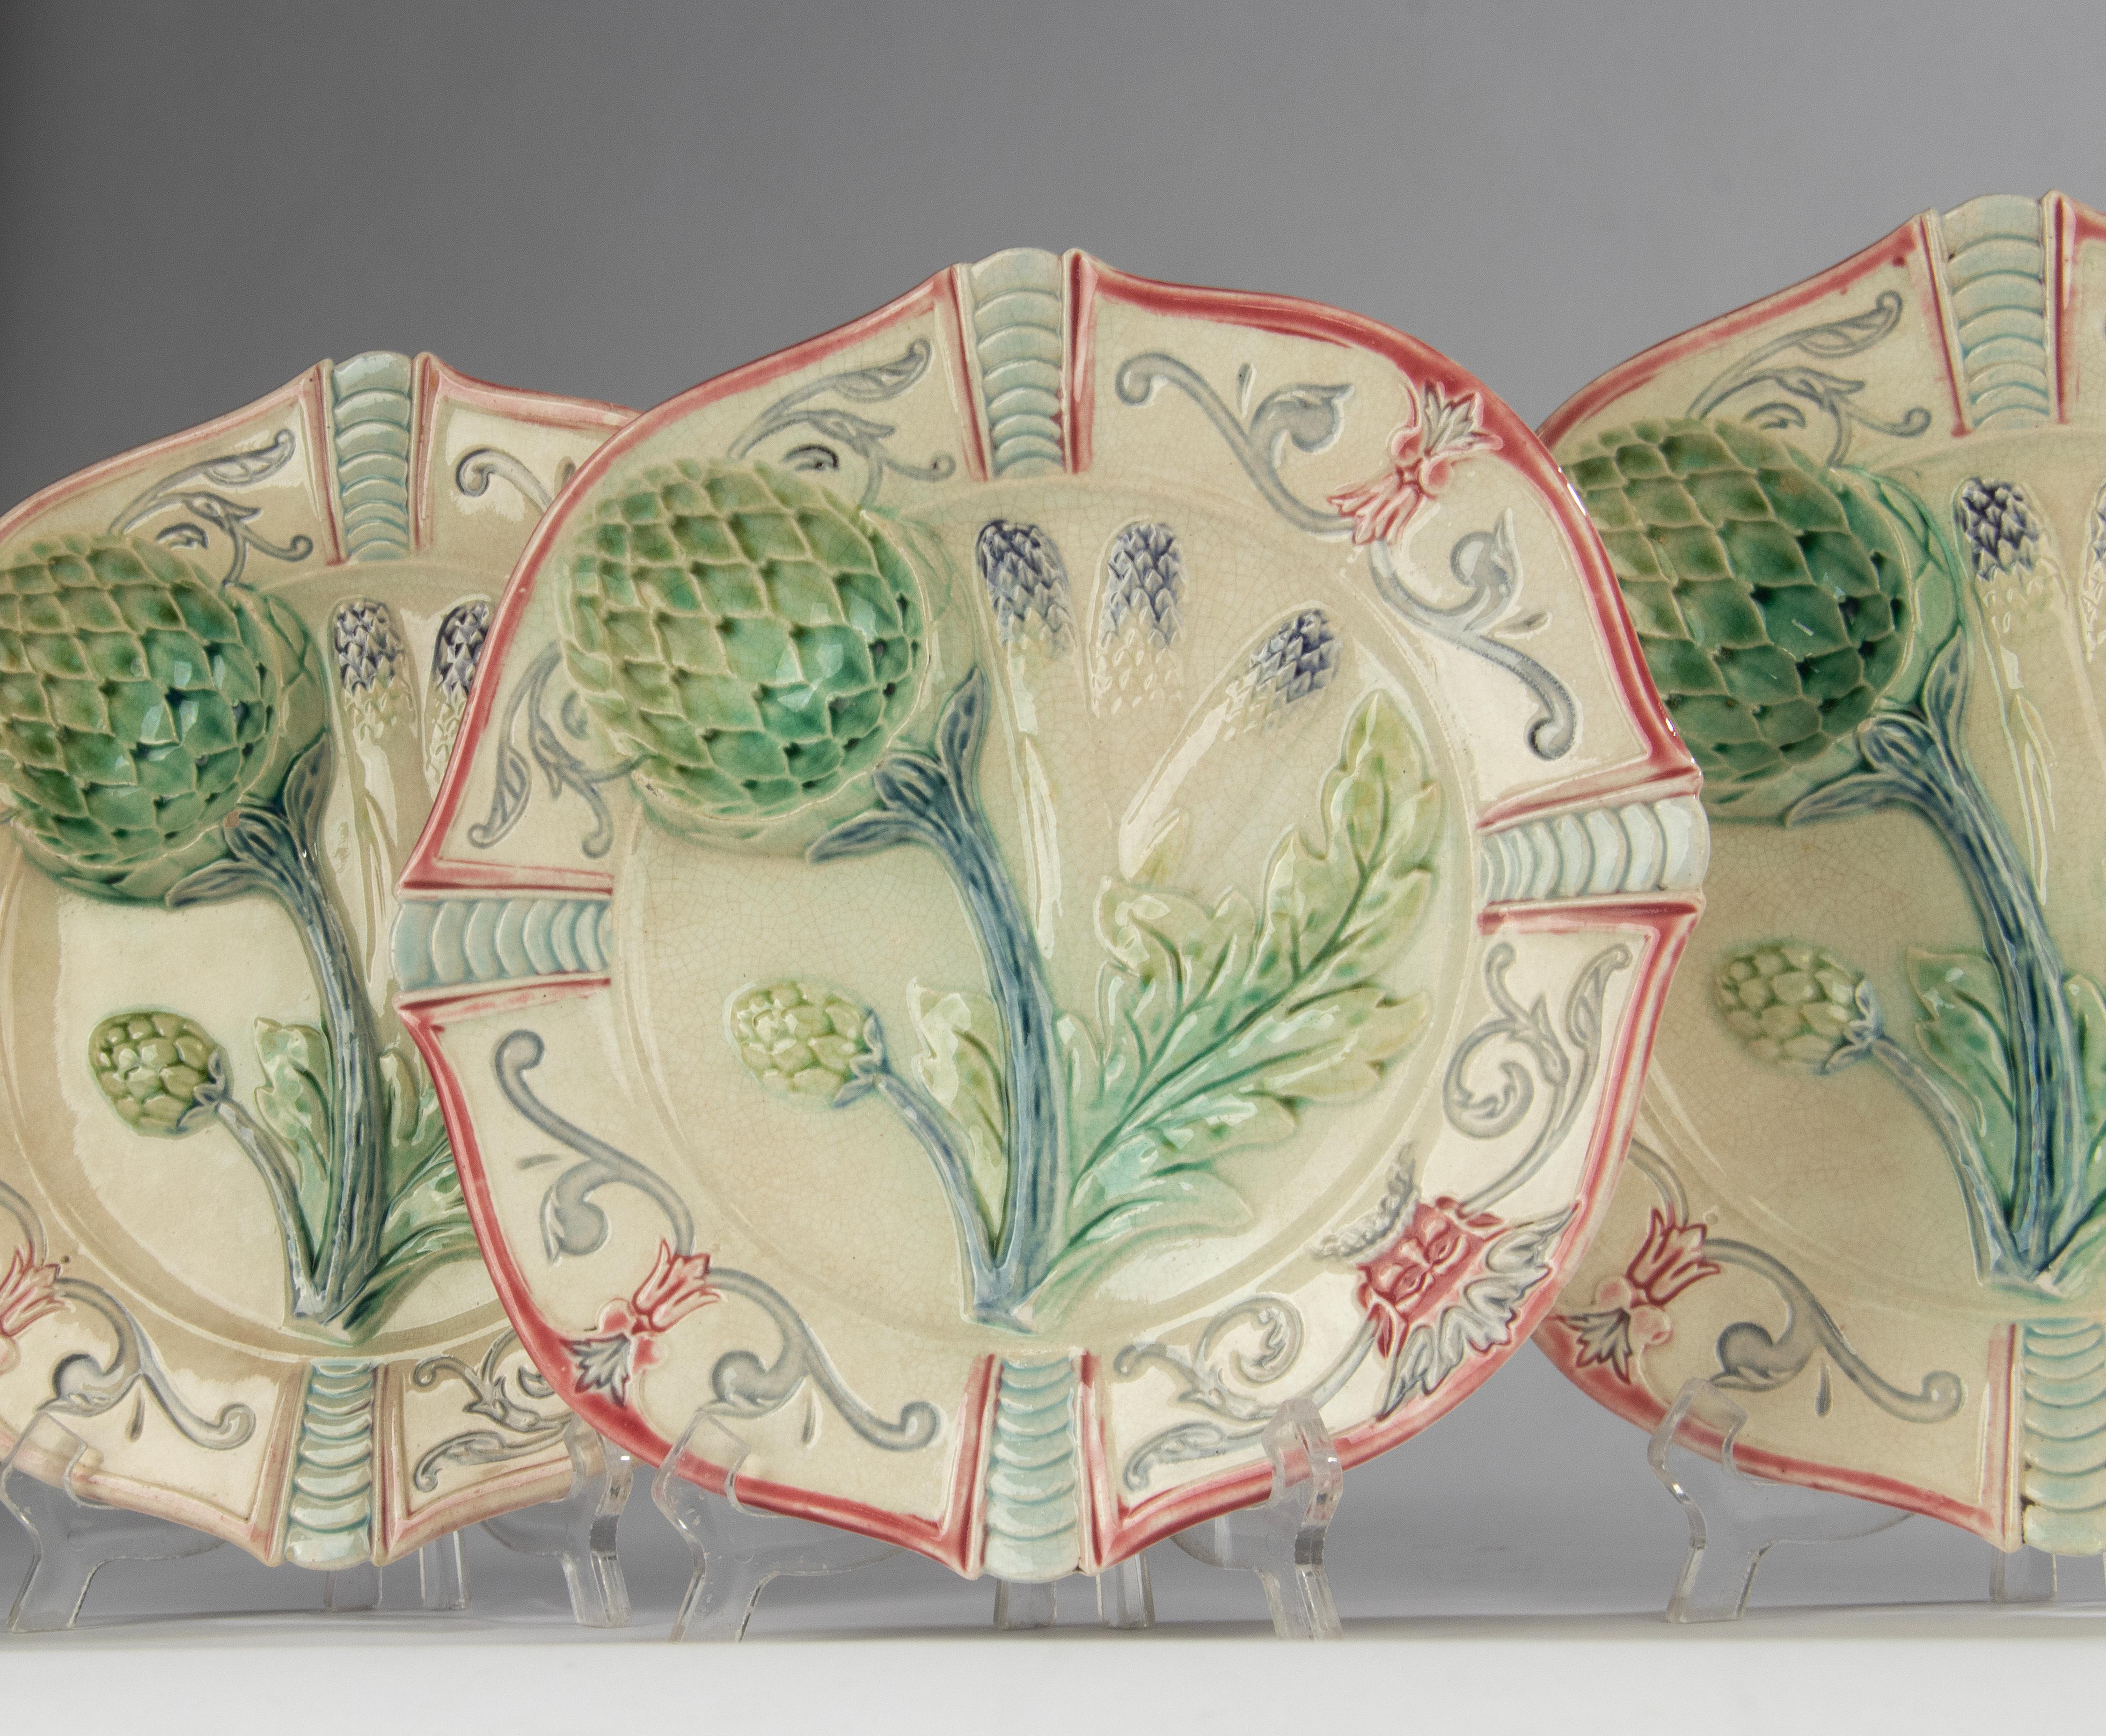 Hand-Crafted 3-Piece Set of 19th Century Majolica Artichoke Plates For Sale